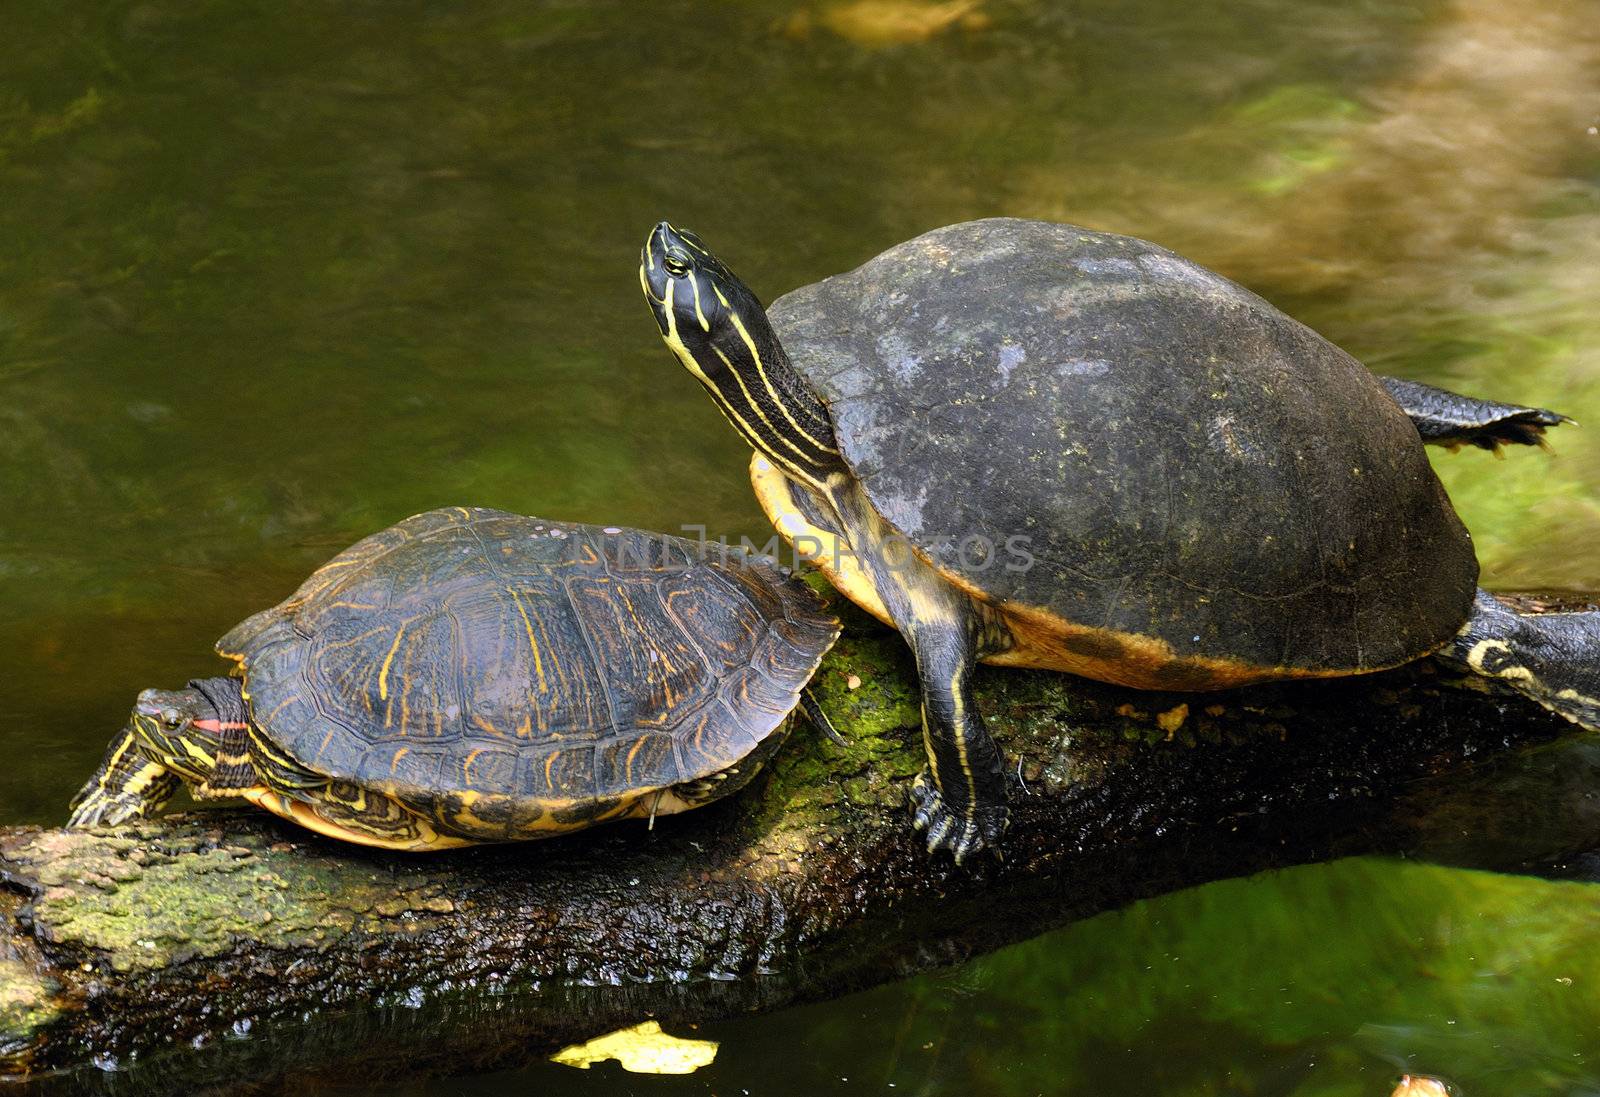 A pair of turtles resting near the shore